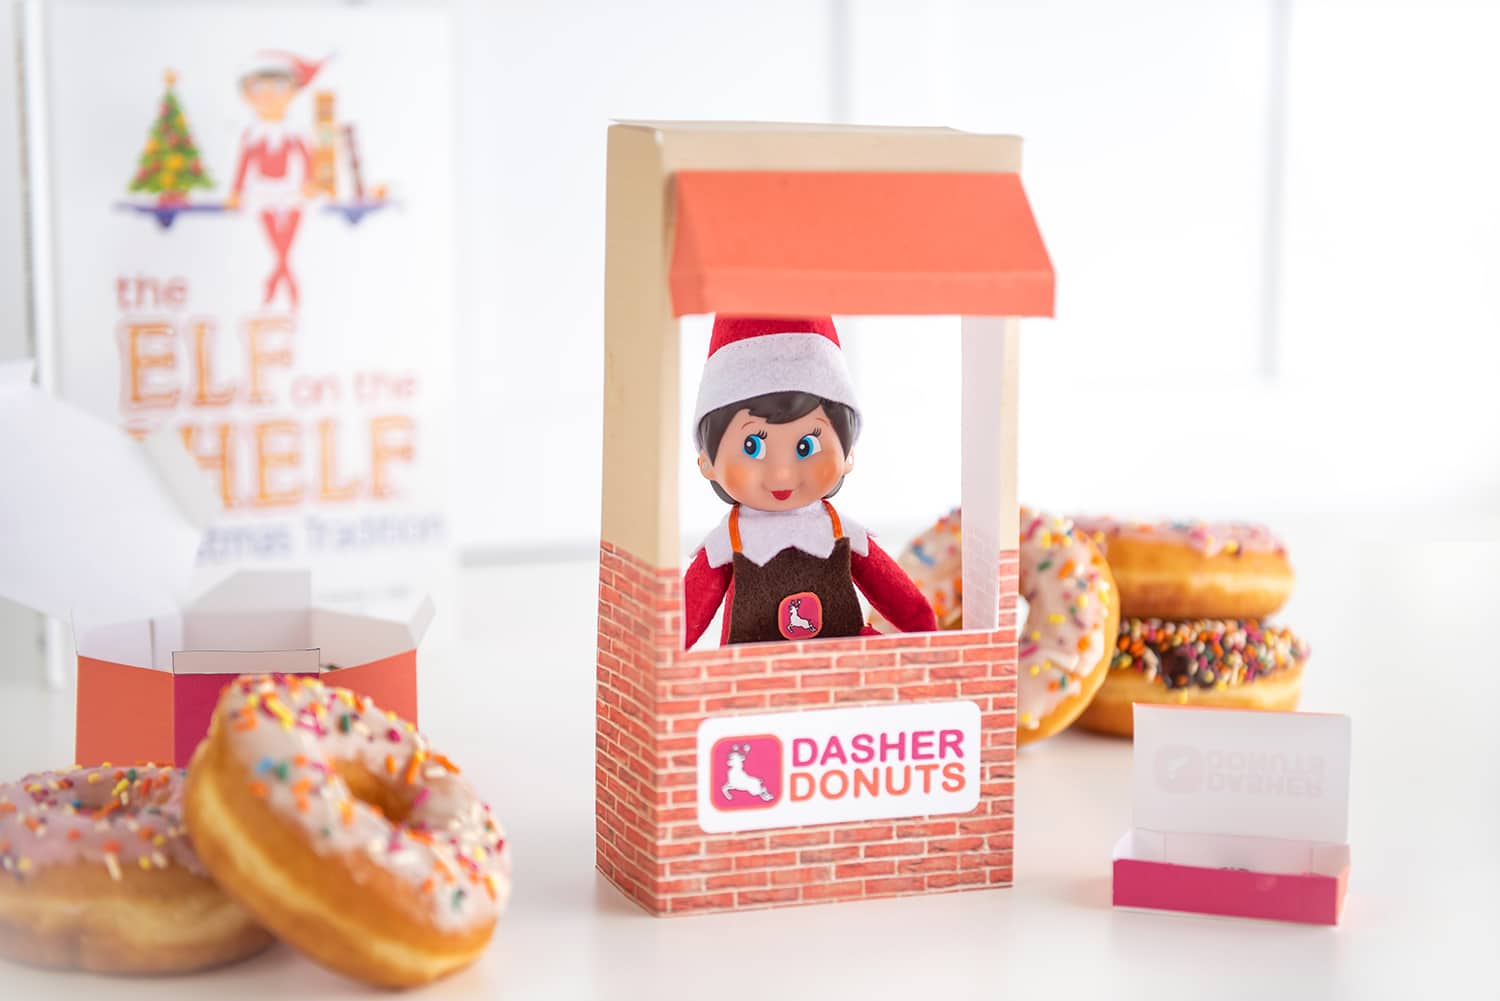 Cute Elf on the Shelf Donut Shop props with donuts and book